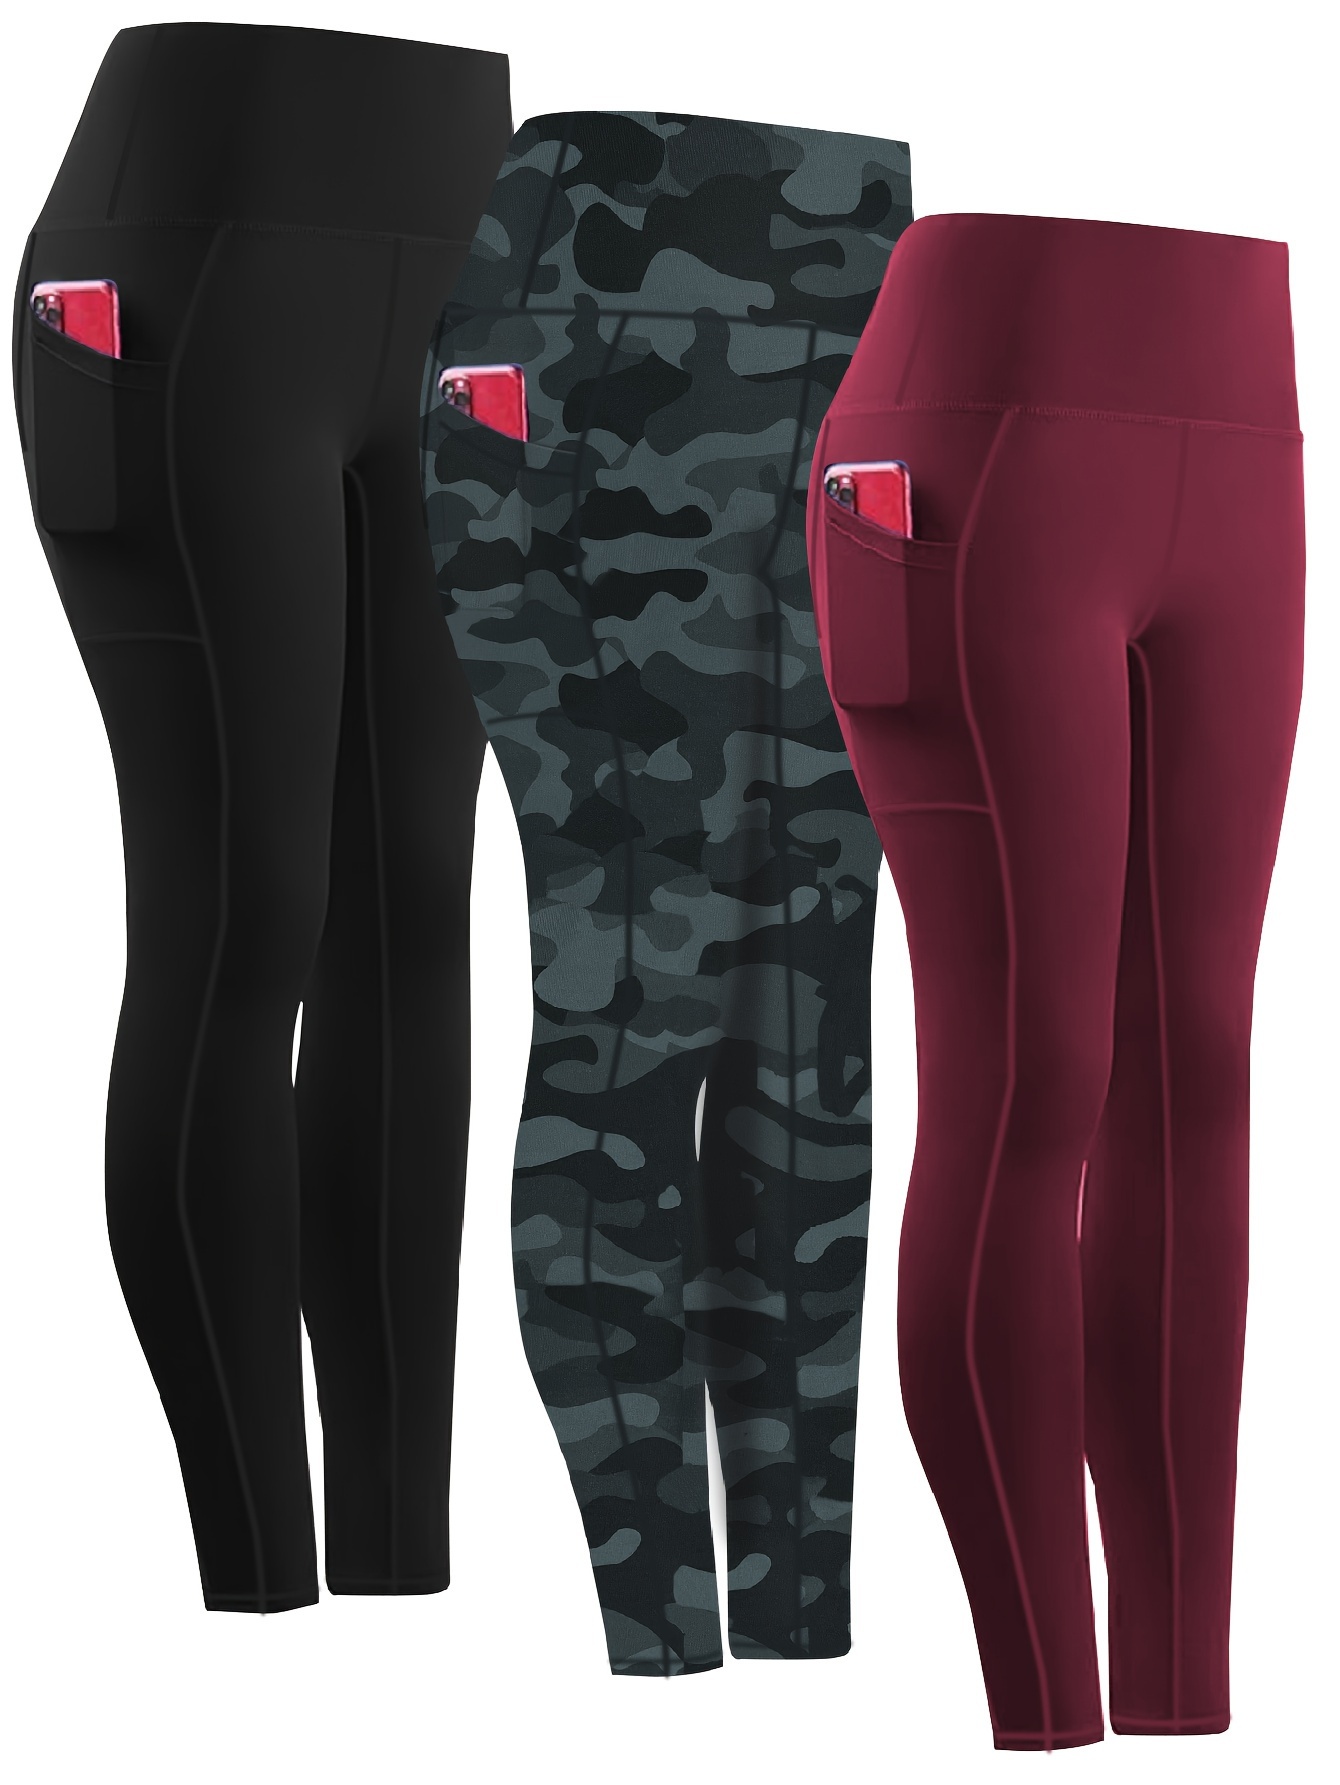 Compression High Waist Black And Grey Camo Leggings With Pockets